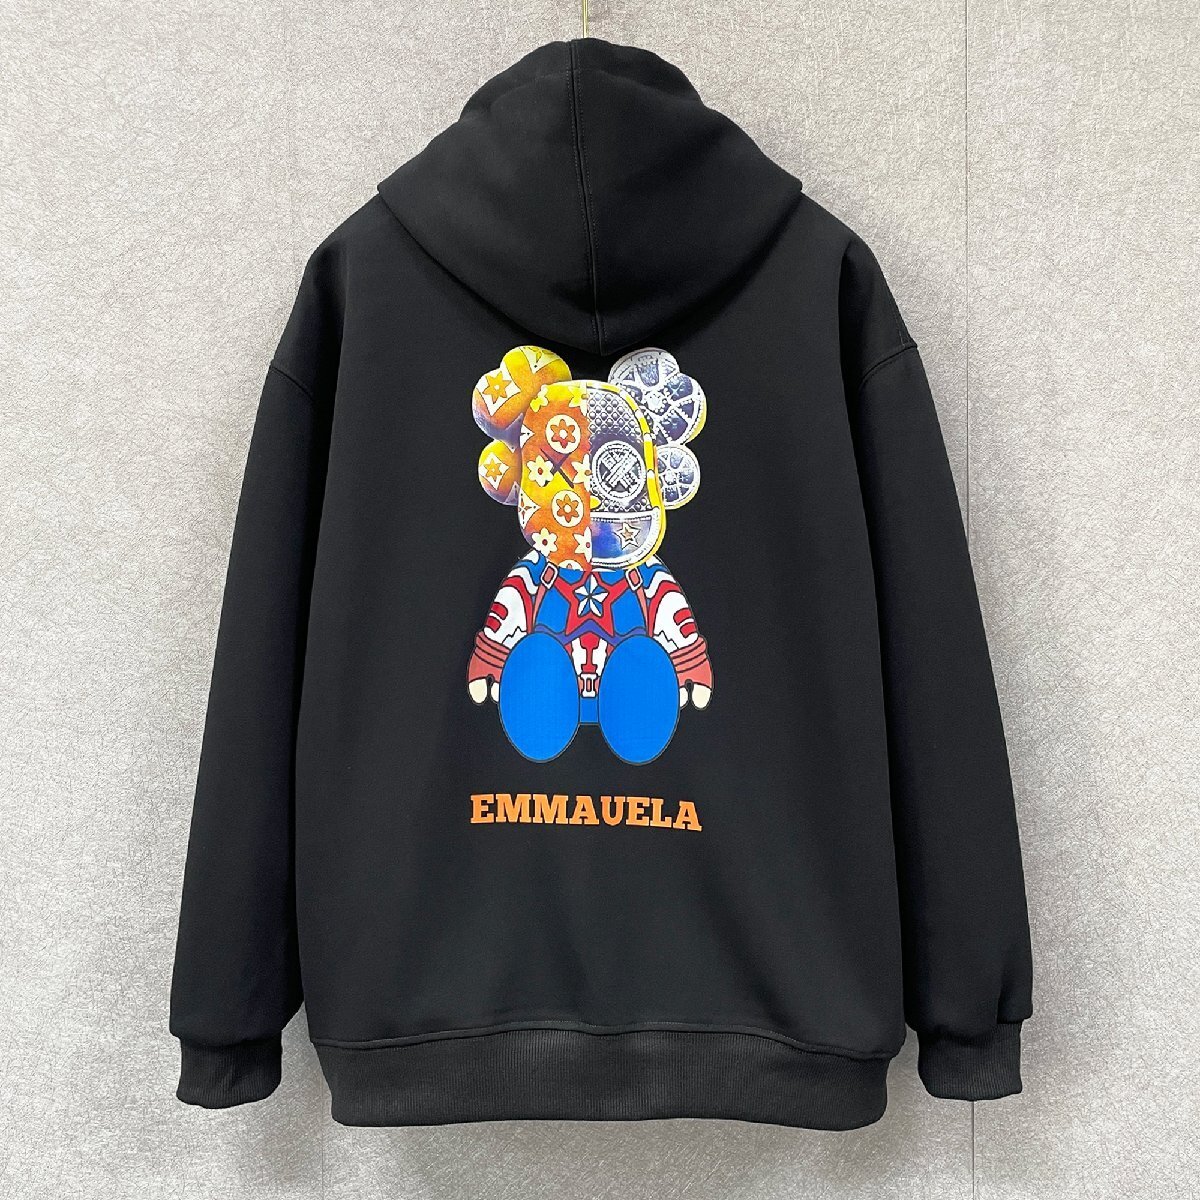  piece .* Parker regular price 4 ten thousand *Emmauela* Italy * milano departure * cotton 100% protection against cold comfortable sweat man and woman use Bearbrick /Bearbrick M/46 size 